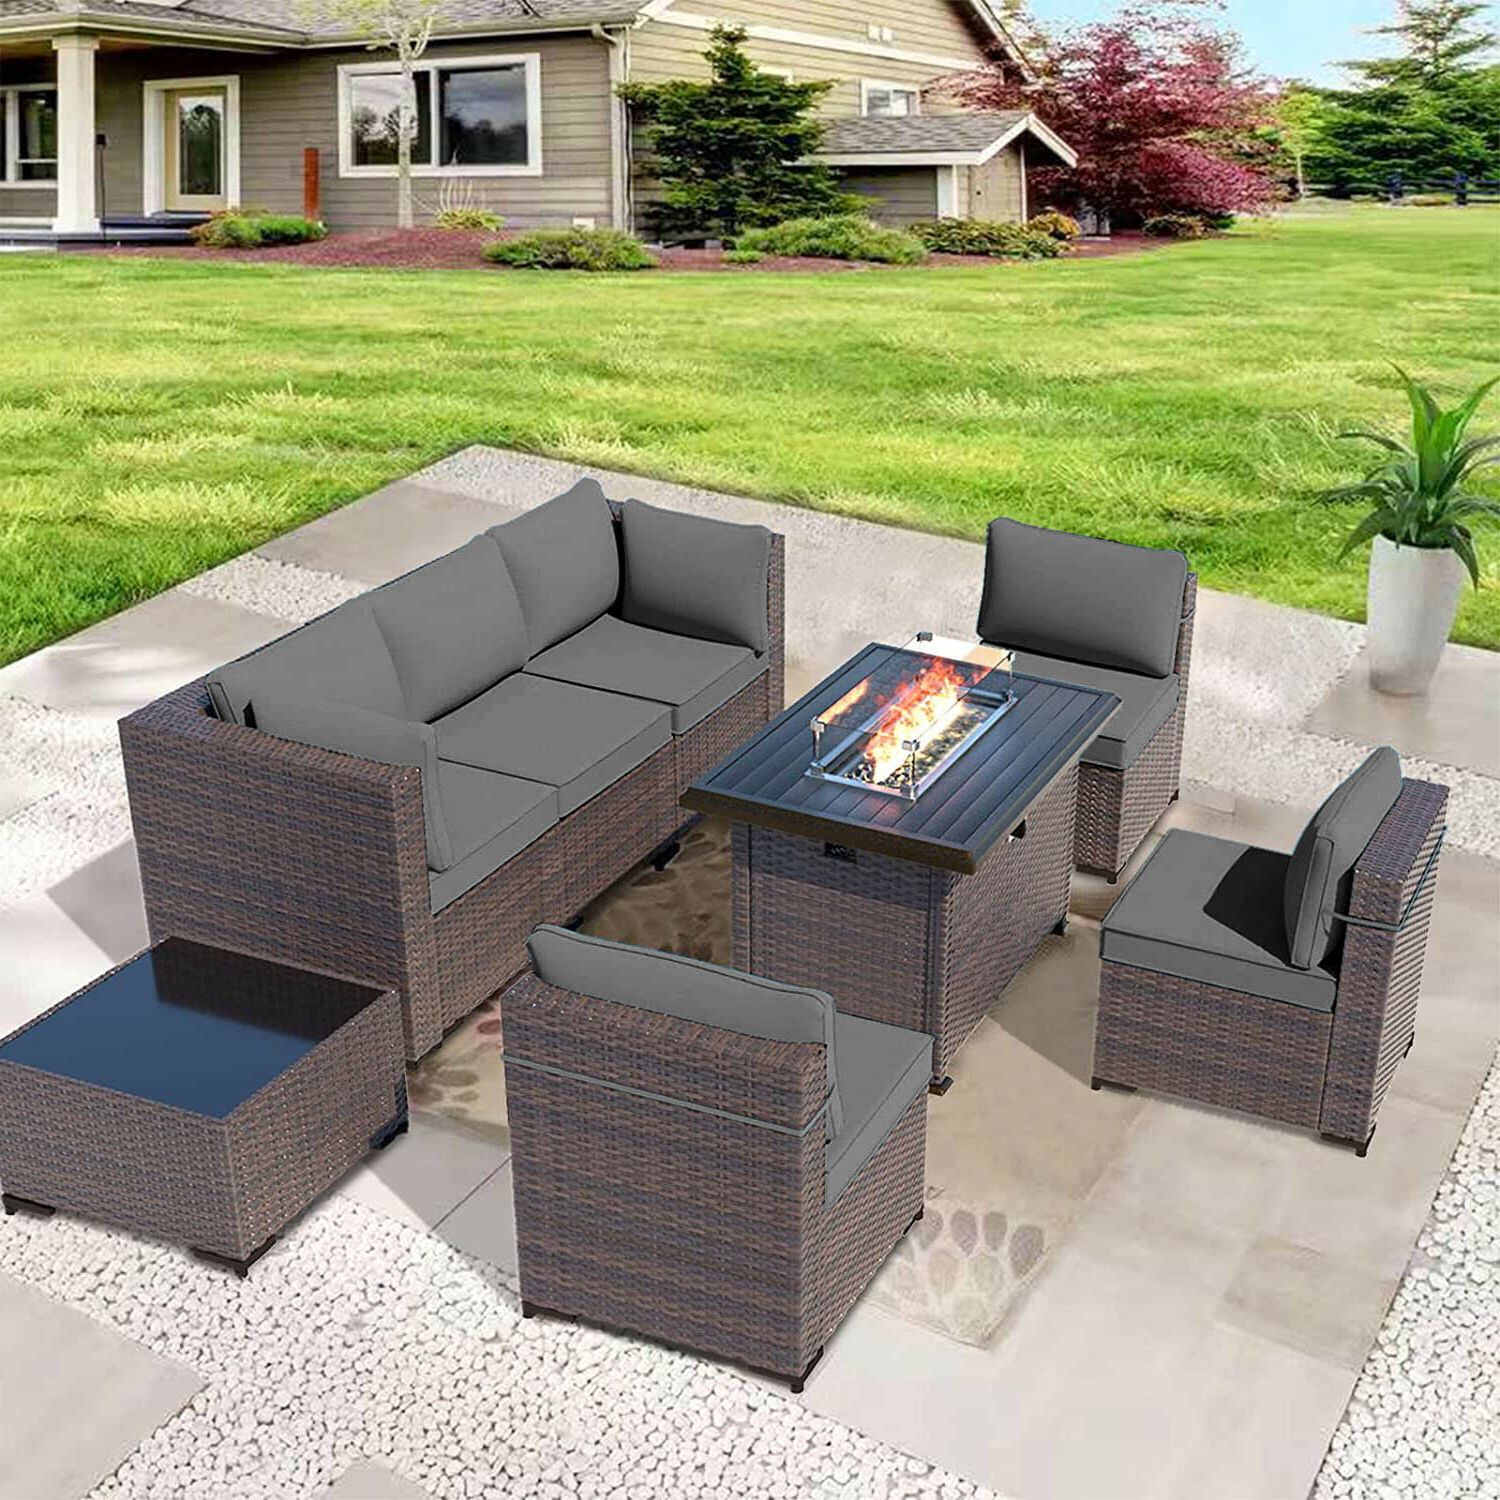 Alaulm 8 Pieces Outdoor Patio Furniture Set With Propane Fire Pit Table  Outdoor Sectional Sofa Sets Patio Furniture 43" Gas Fire Pit Brown Pe  Rattan Patio Conversation Set W/6 Cushions, Gray – Intended For Latest 8 Pcs Outdoor Patio Furniture Set (View 10 of 15)